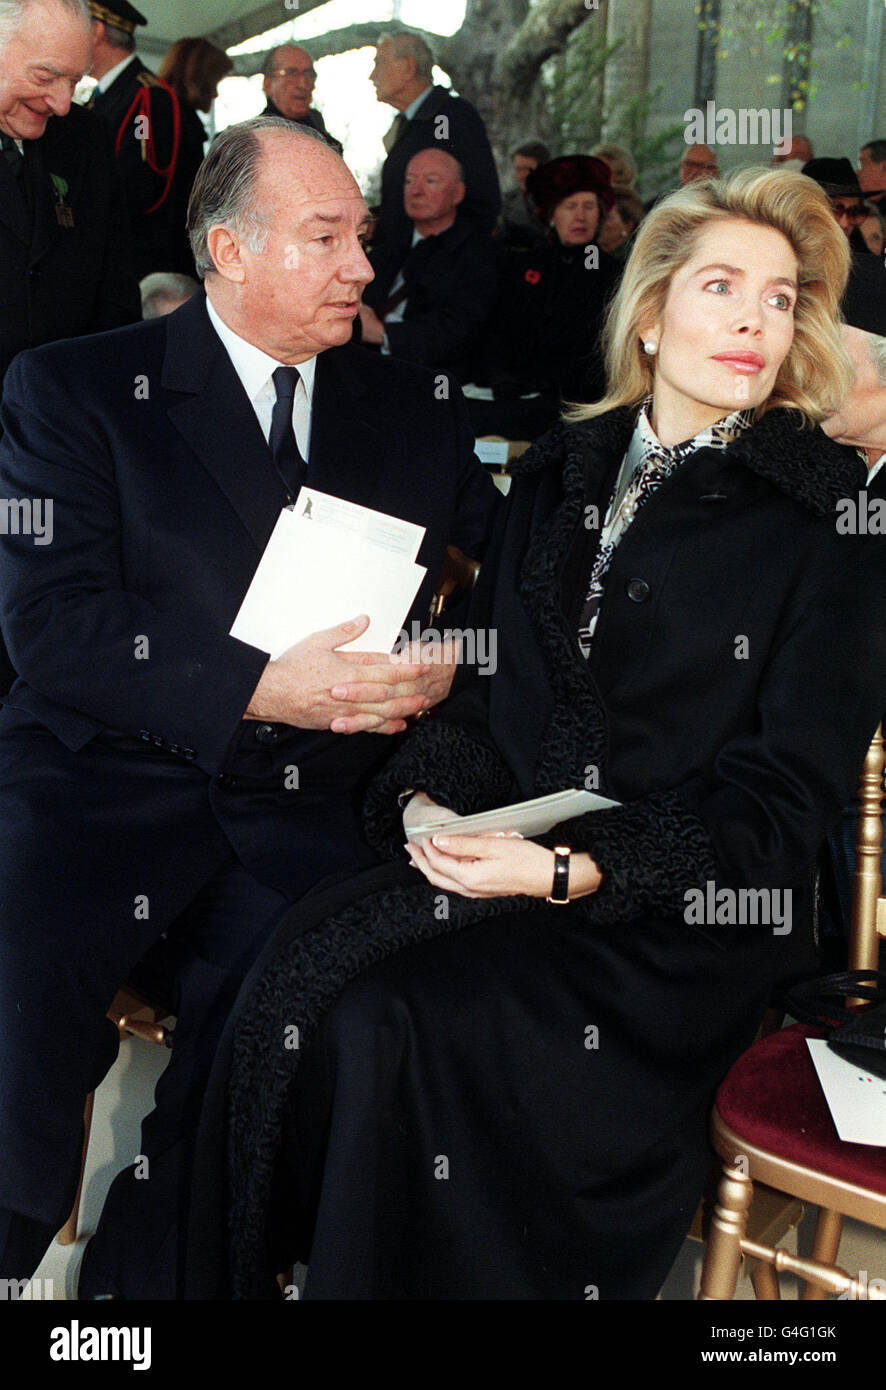 PA NEWS 11/11/98 PRINCE AGA KHAN AND HIS WIFE, GERMAN-BORN PRINCESS BEGUM AGA KHAN, DURING A CEREMONY IN WHICH BRITAIN'S QUEEN ELIZABETH II AND FRENCH PRESIDENT JACQUES CHIRAC JOINTLY UNVEILED A STATUE OF SIR WINSTON CHURCHILL. Stock Photo